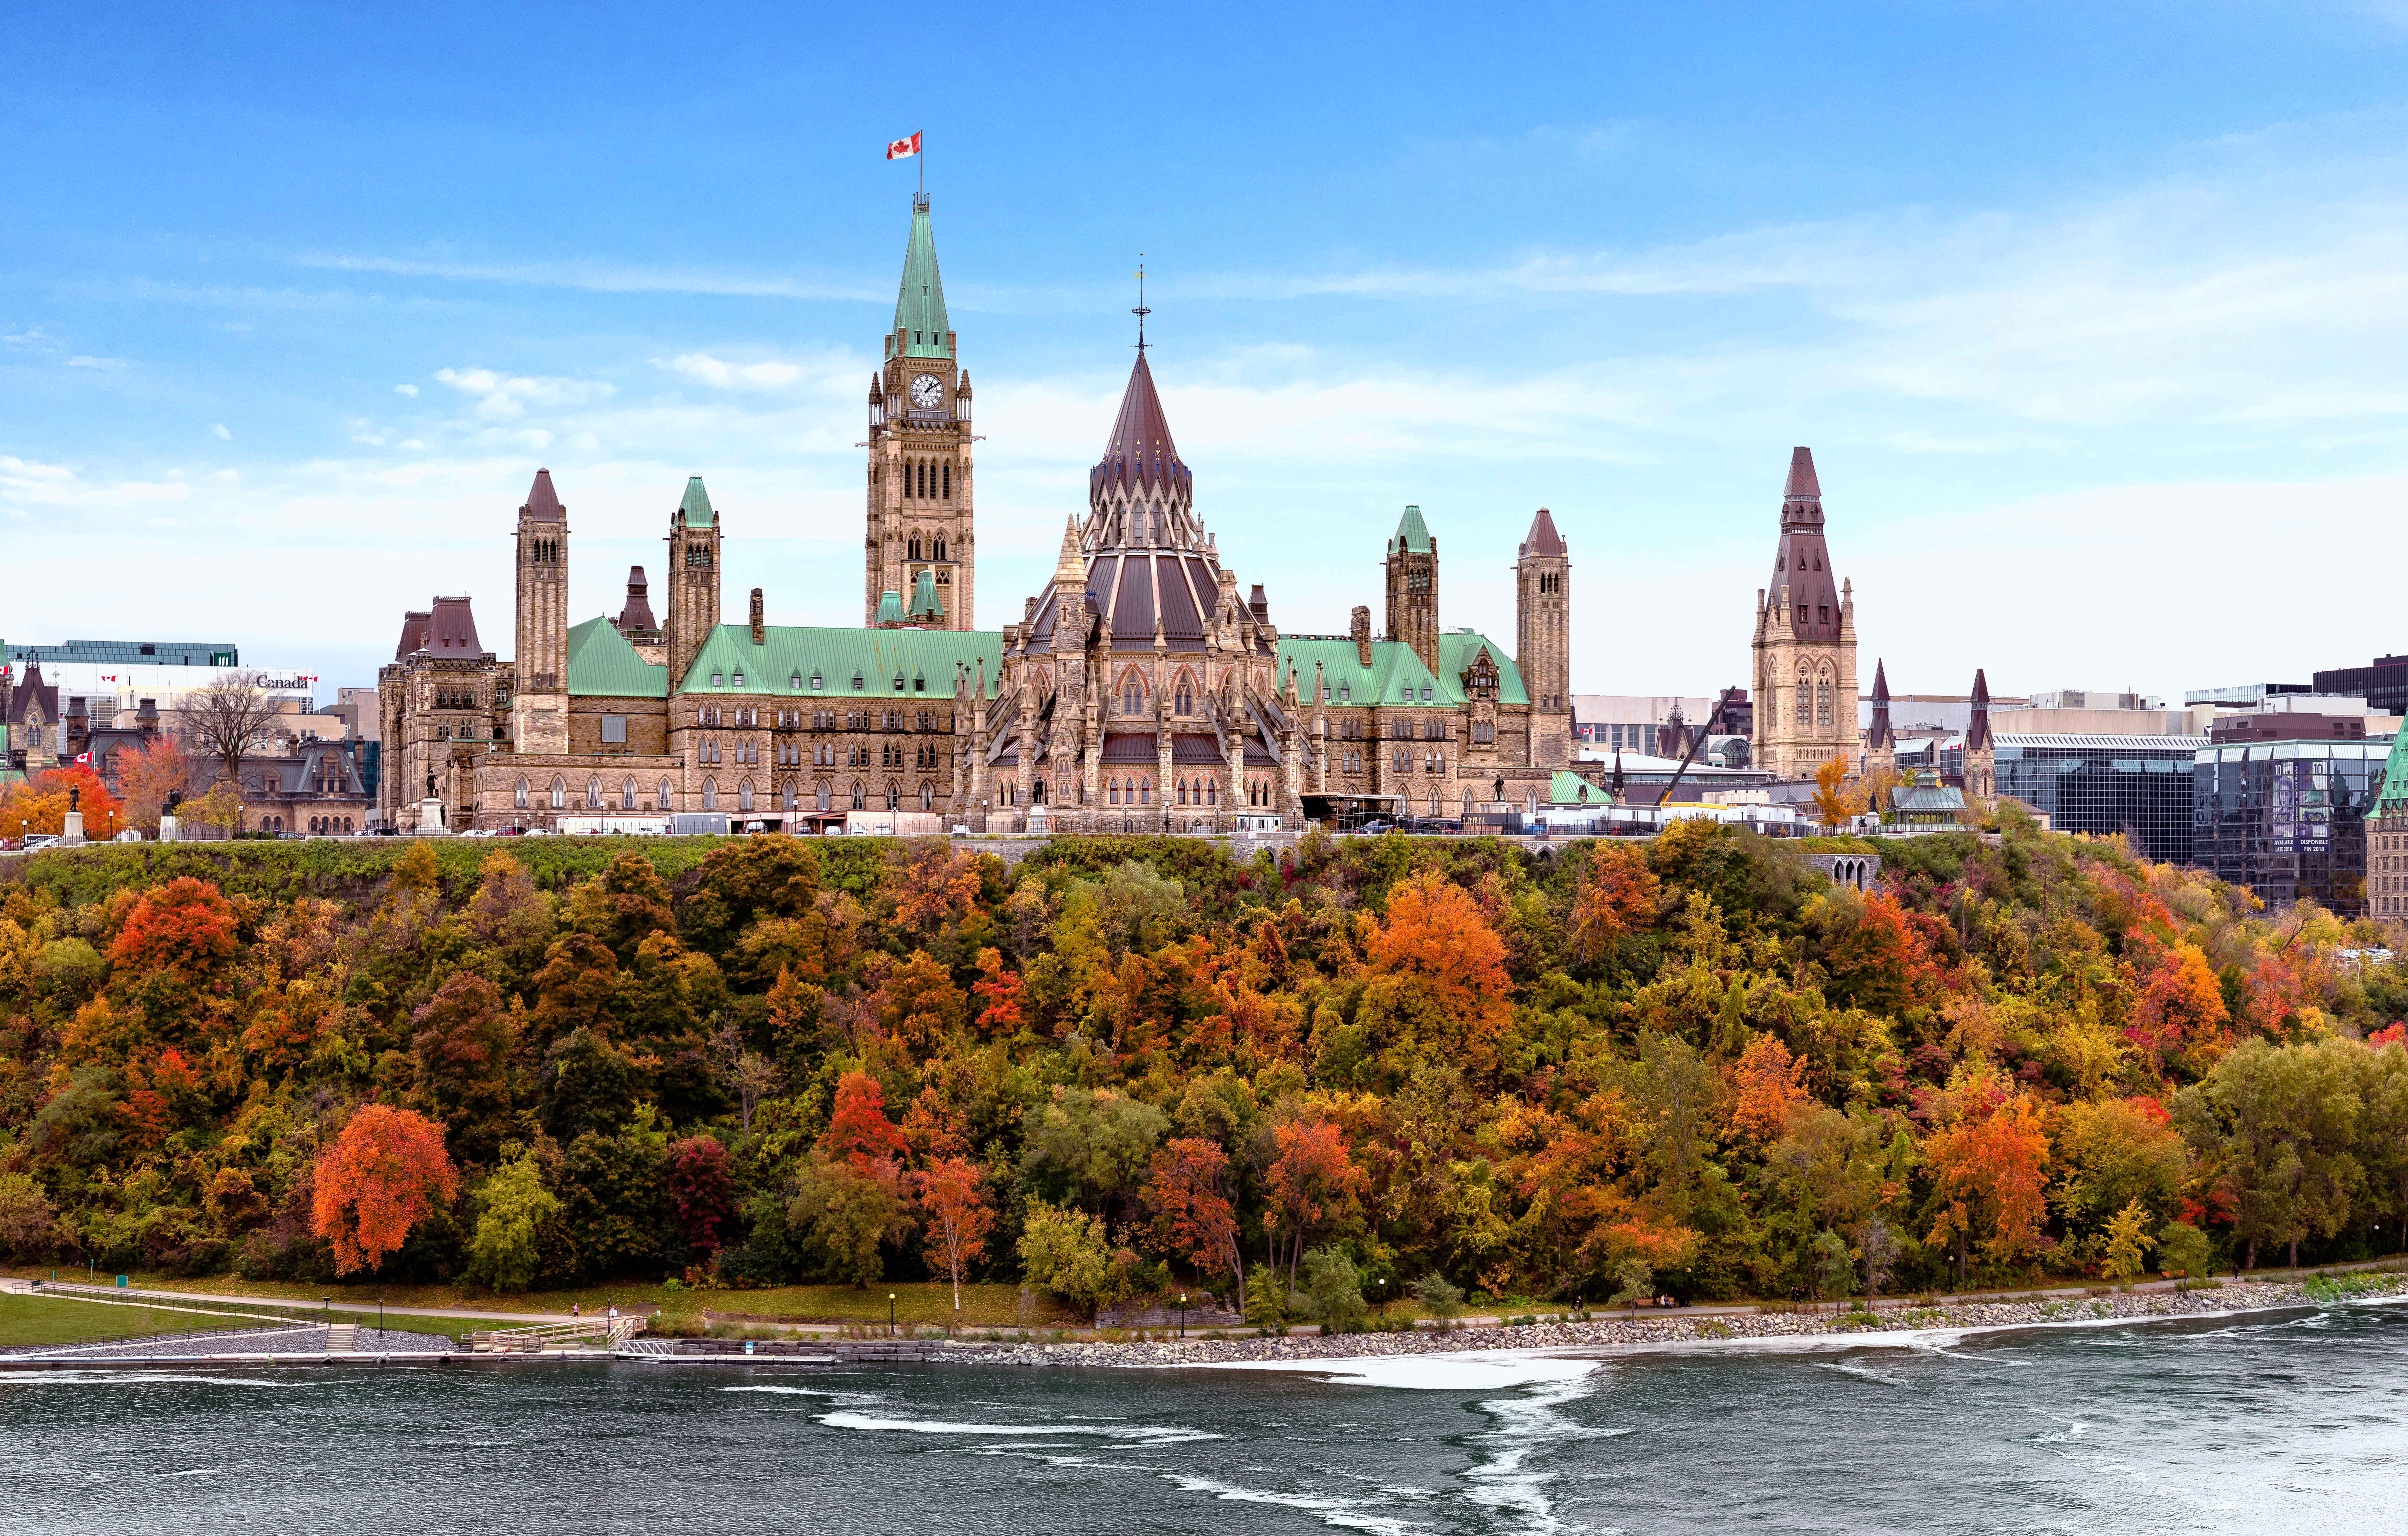 Canada's Parliament Hill in the Autumn